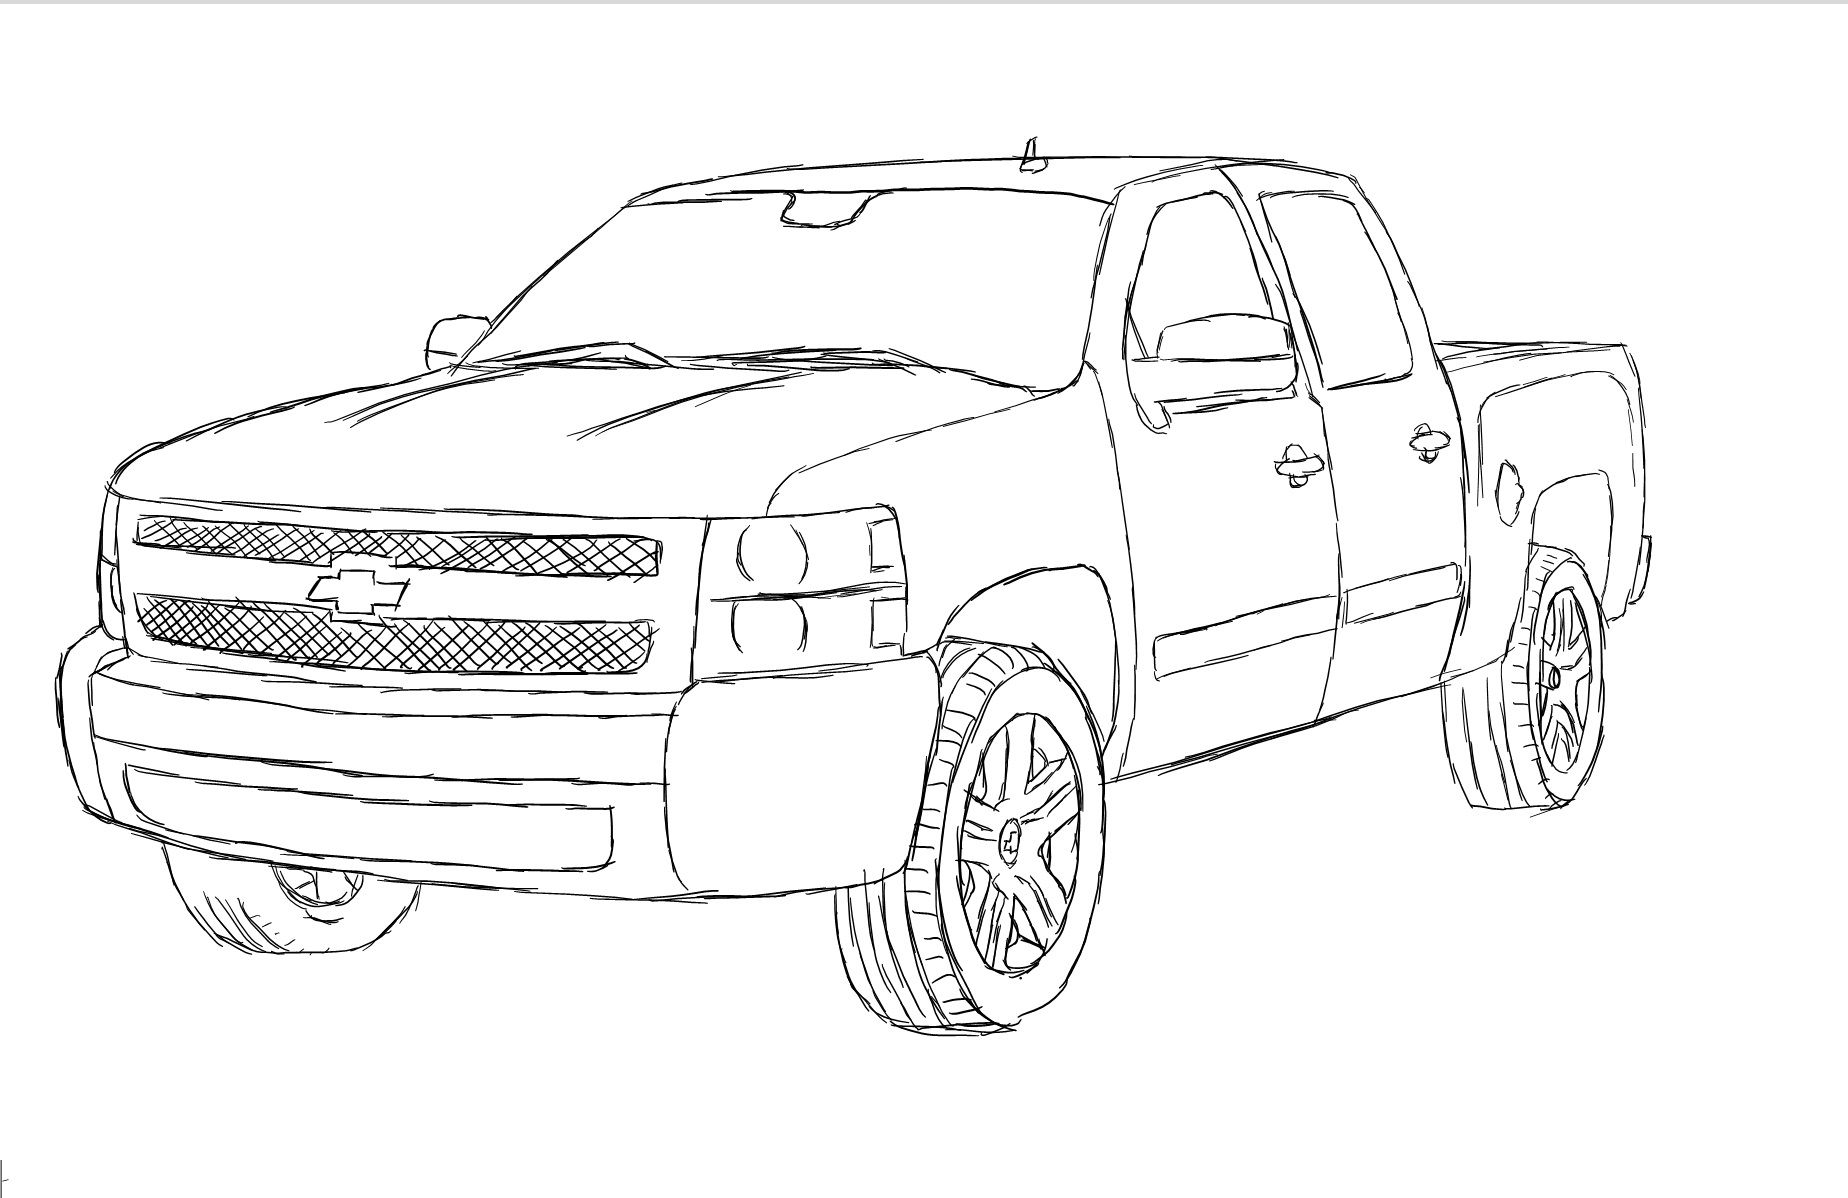 820 Simple Chevy Silverado Truck Coloring Pages for Kids